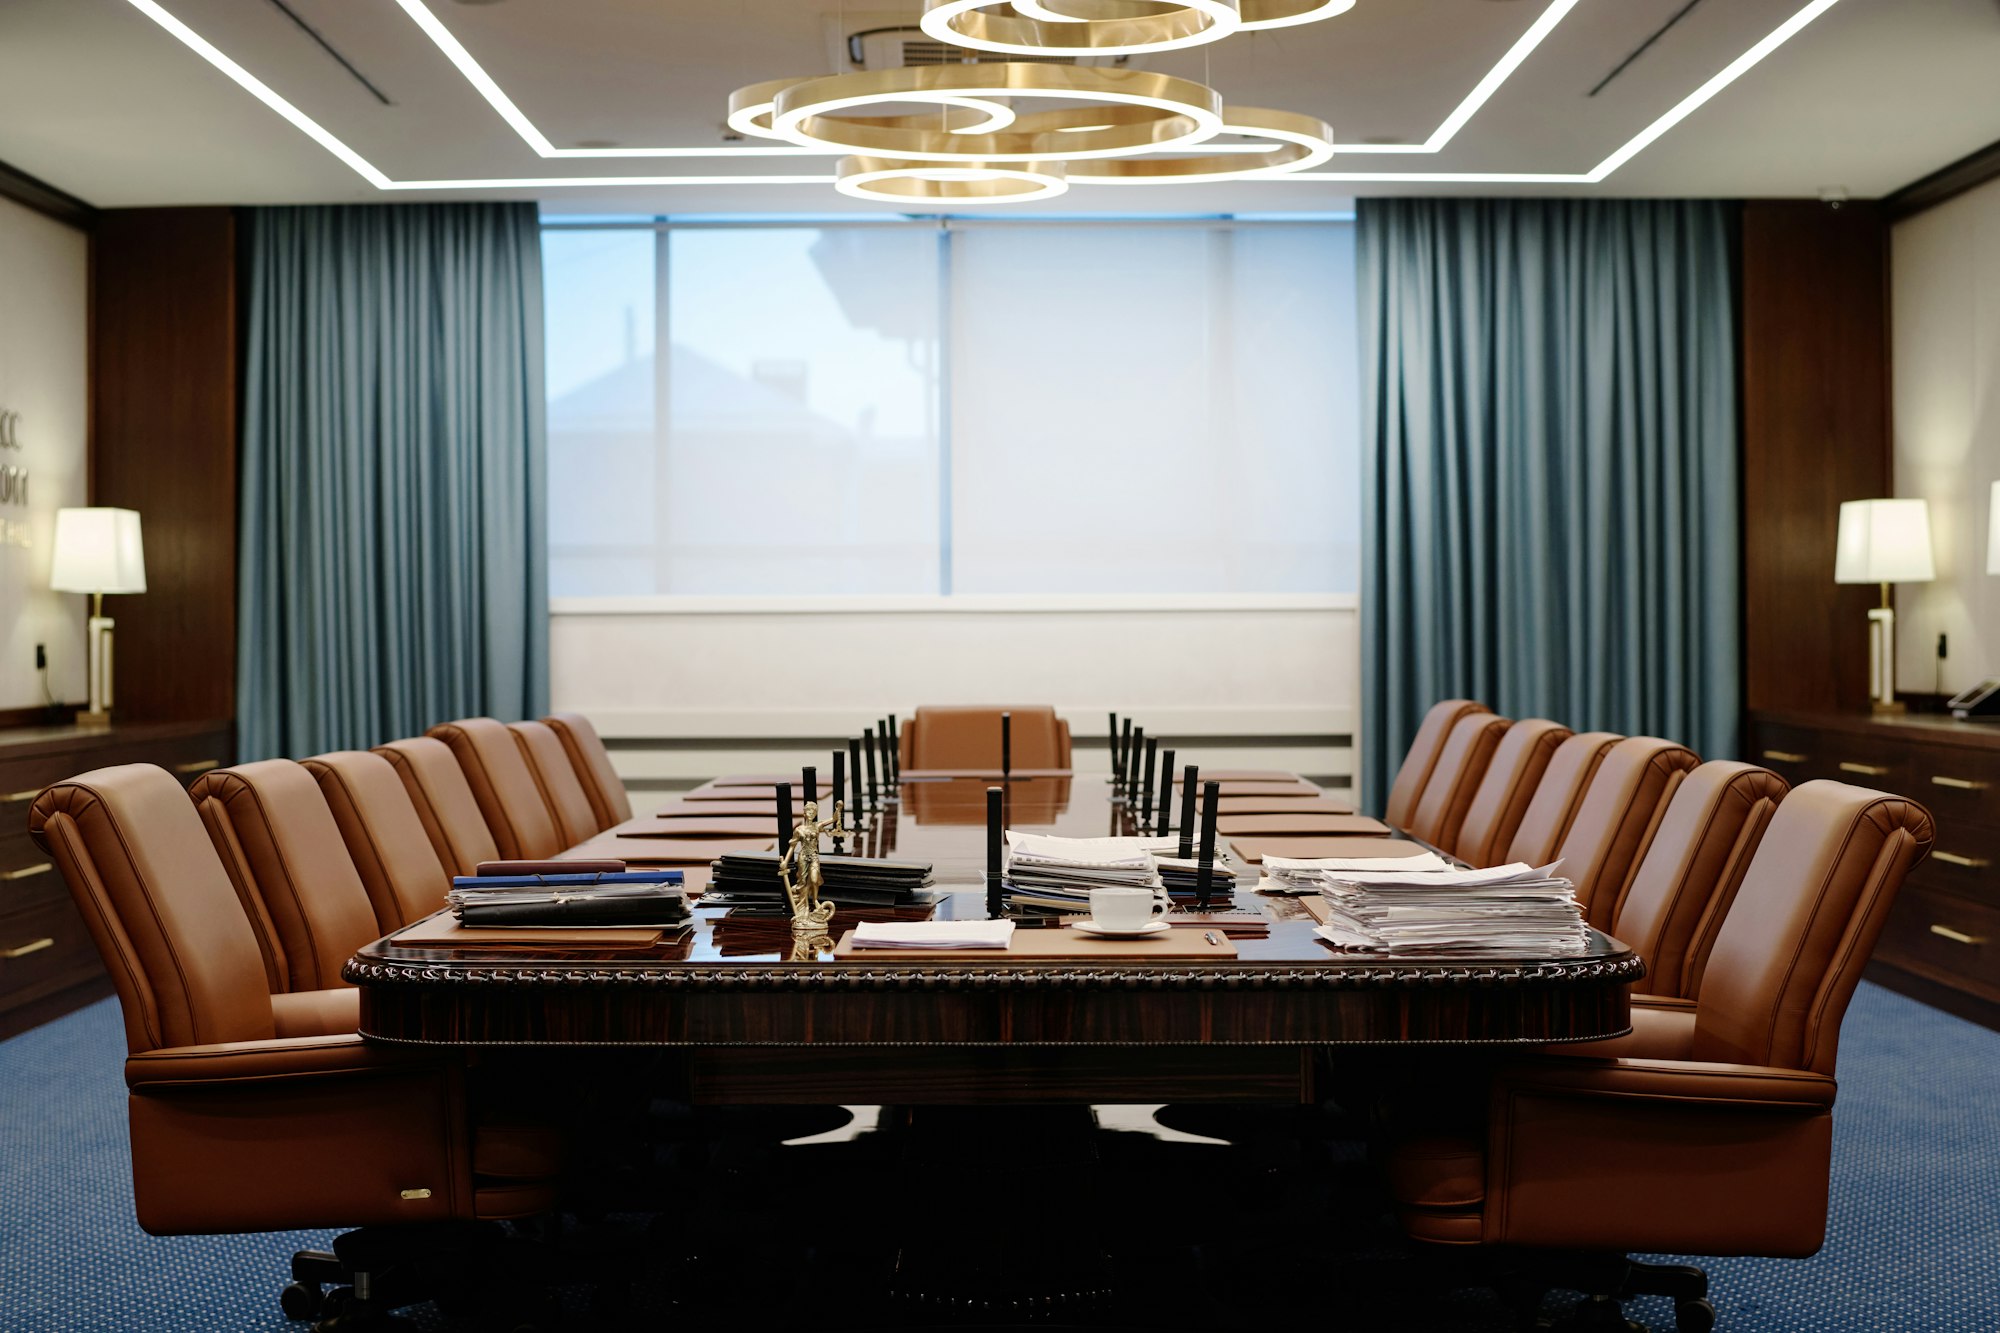 Boardroom with Exquisite Furniture Ready for Business Conference